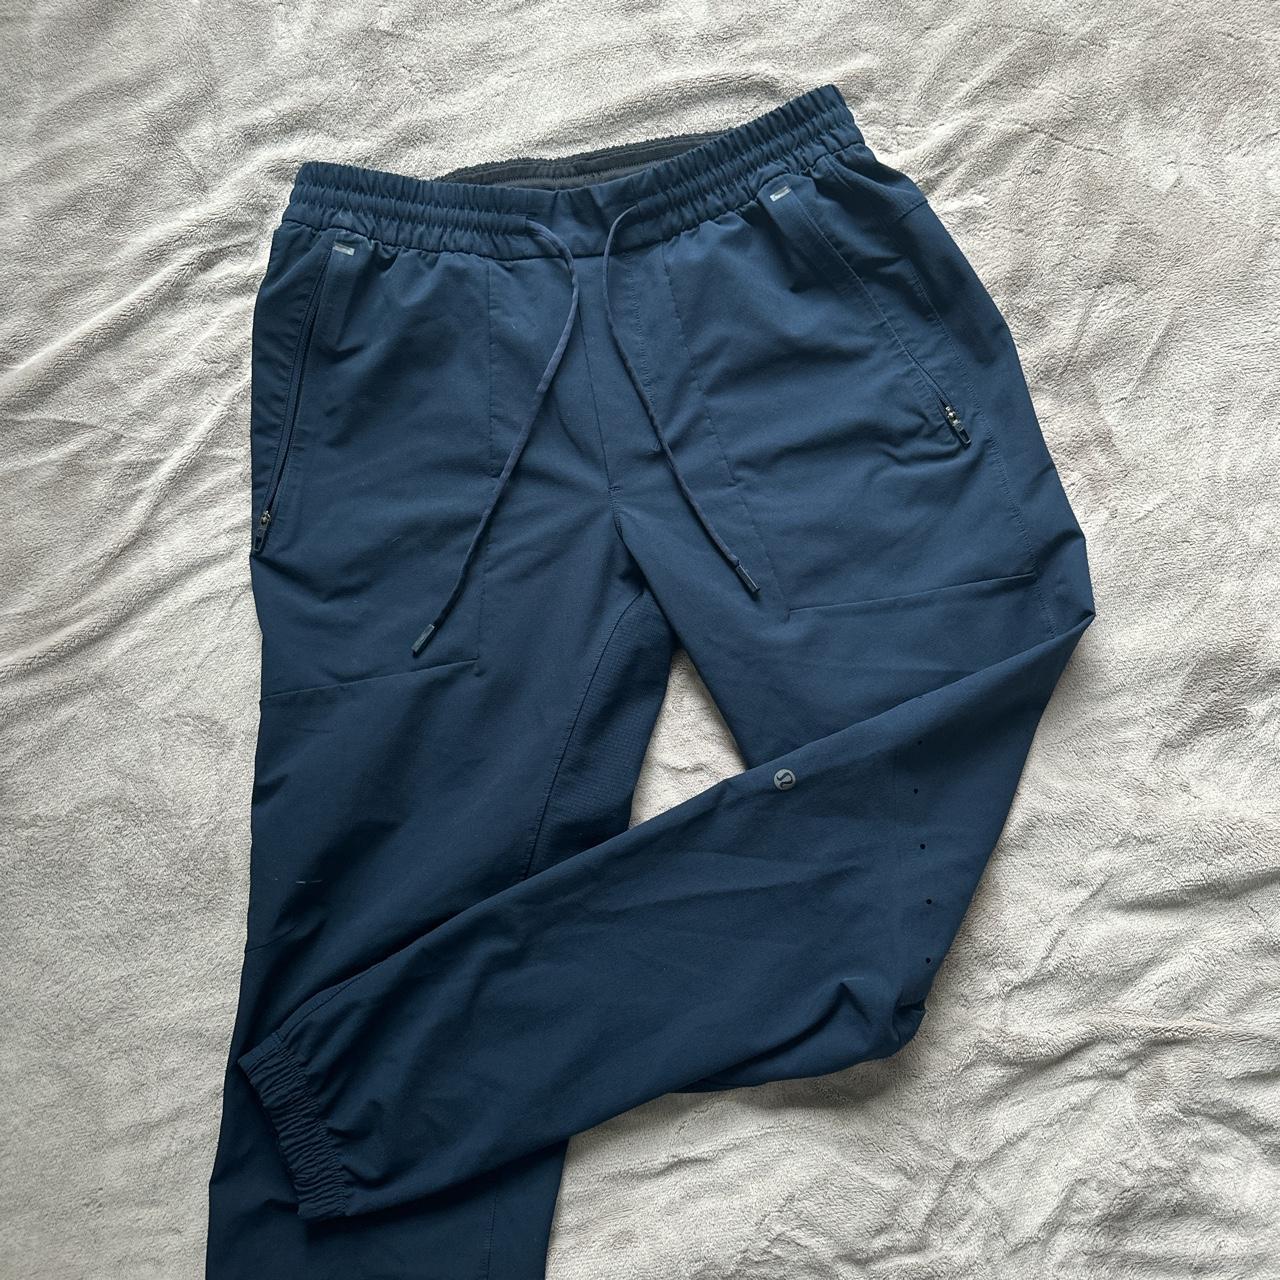 All in motion men's pants. 30x30. Good condition. - Depop